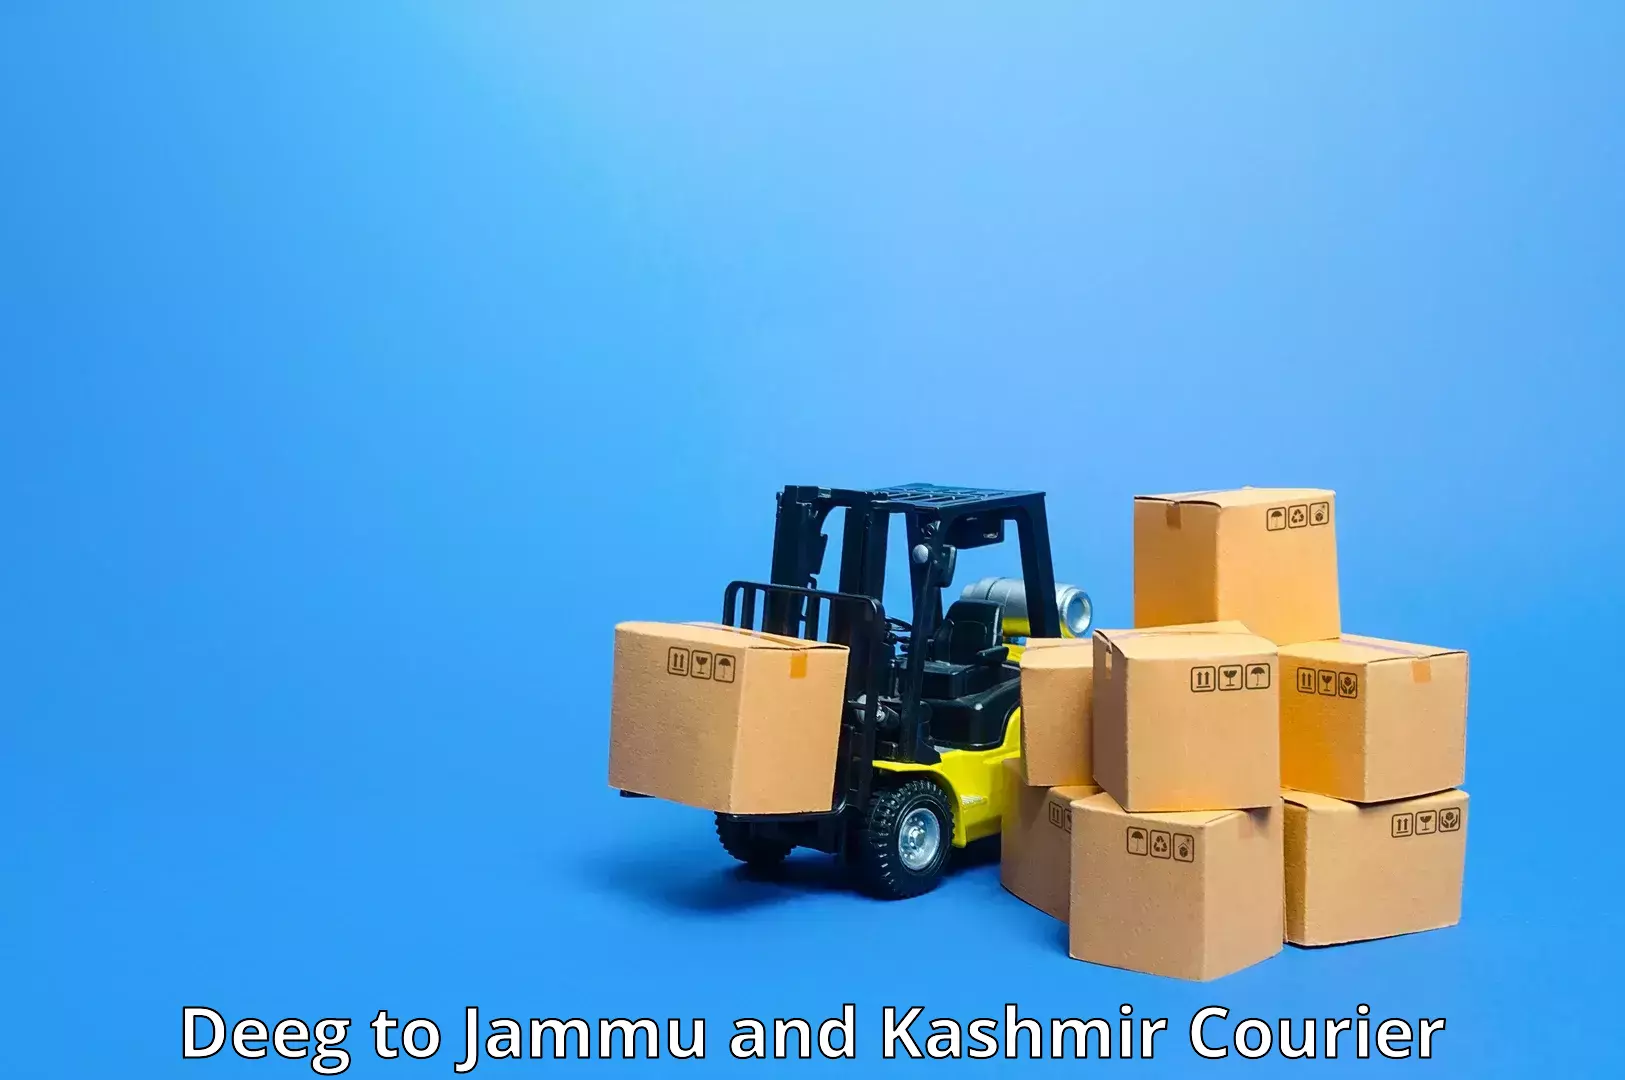 Parcel handling and care Deeg to Jammu